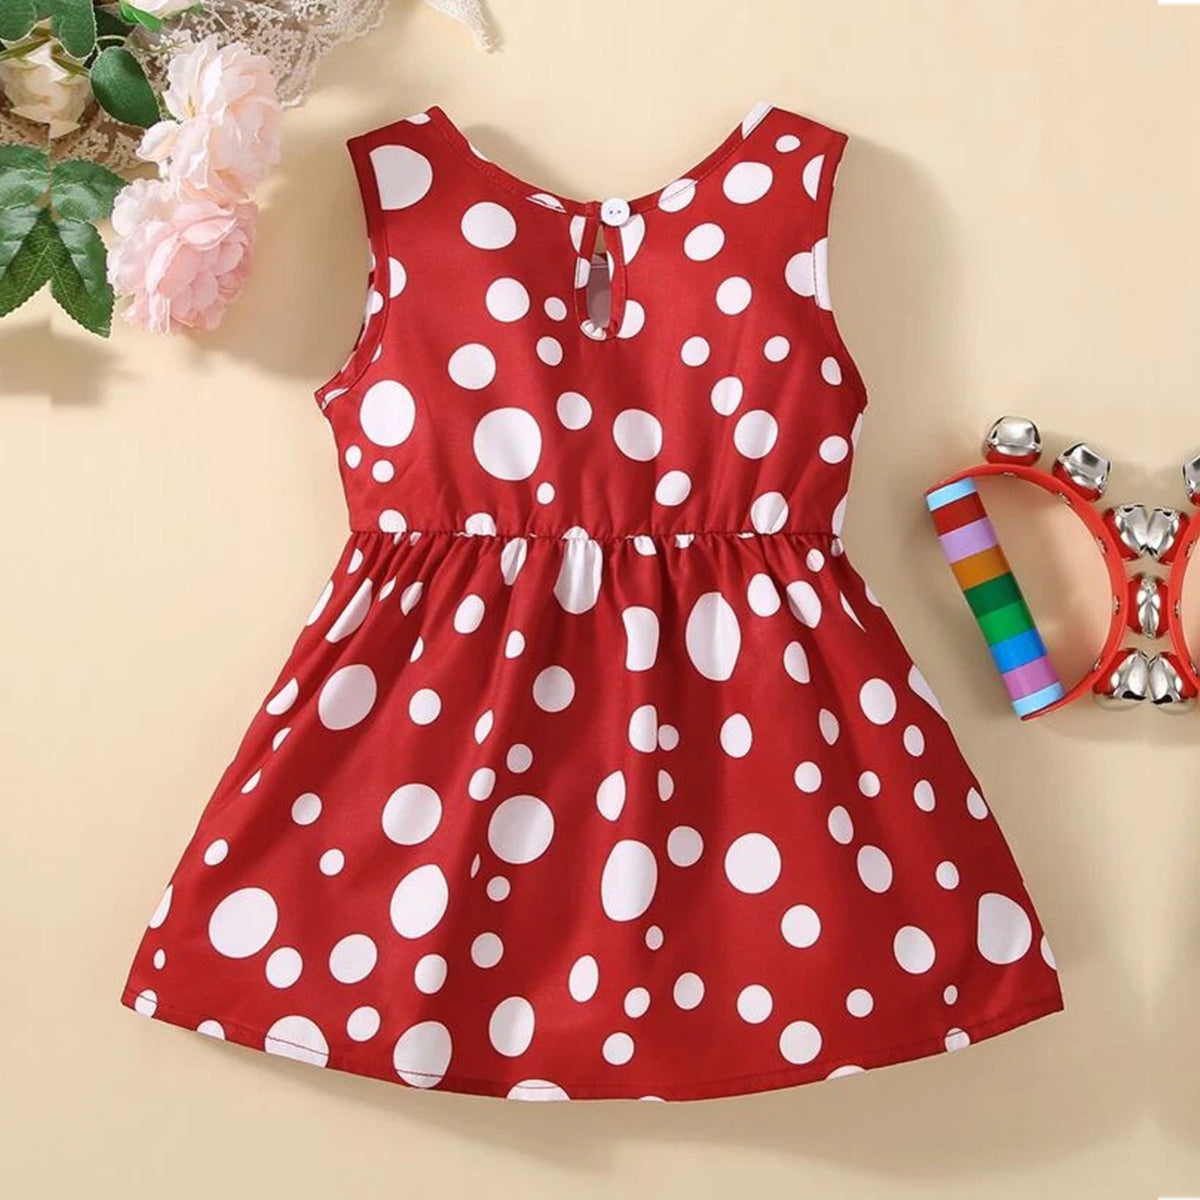 BabyGirl's Cotton Polka Red Dot Bow Front Stylish Frocks & Dresses for Kids.